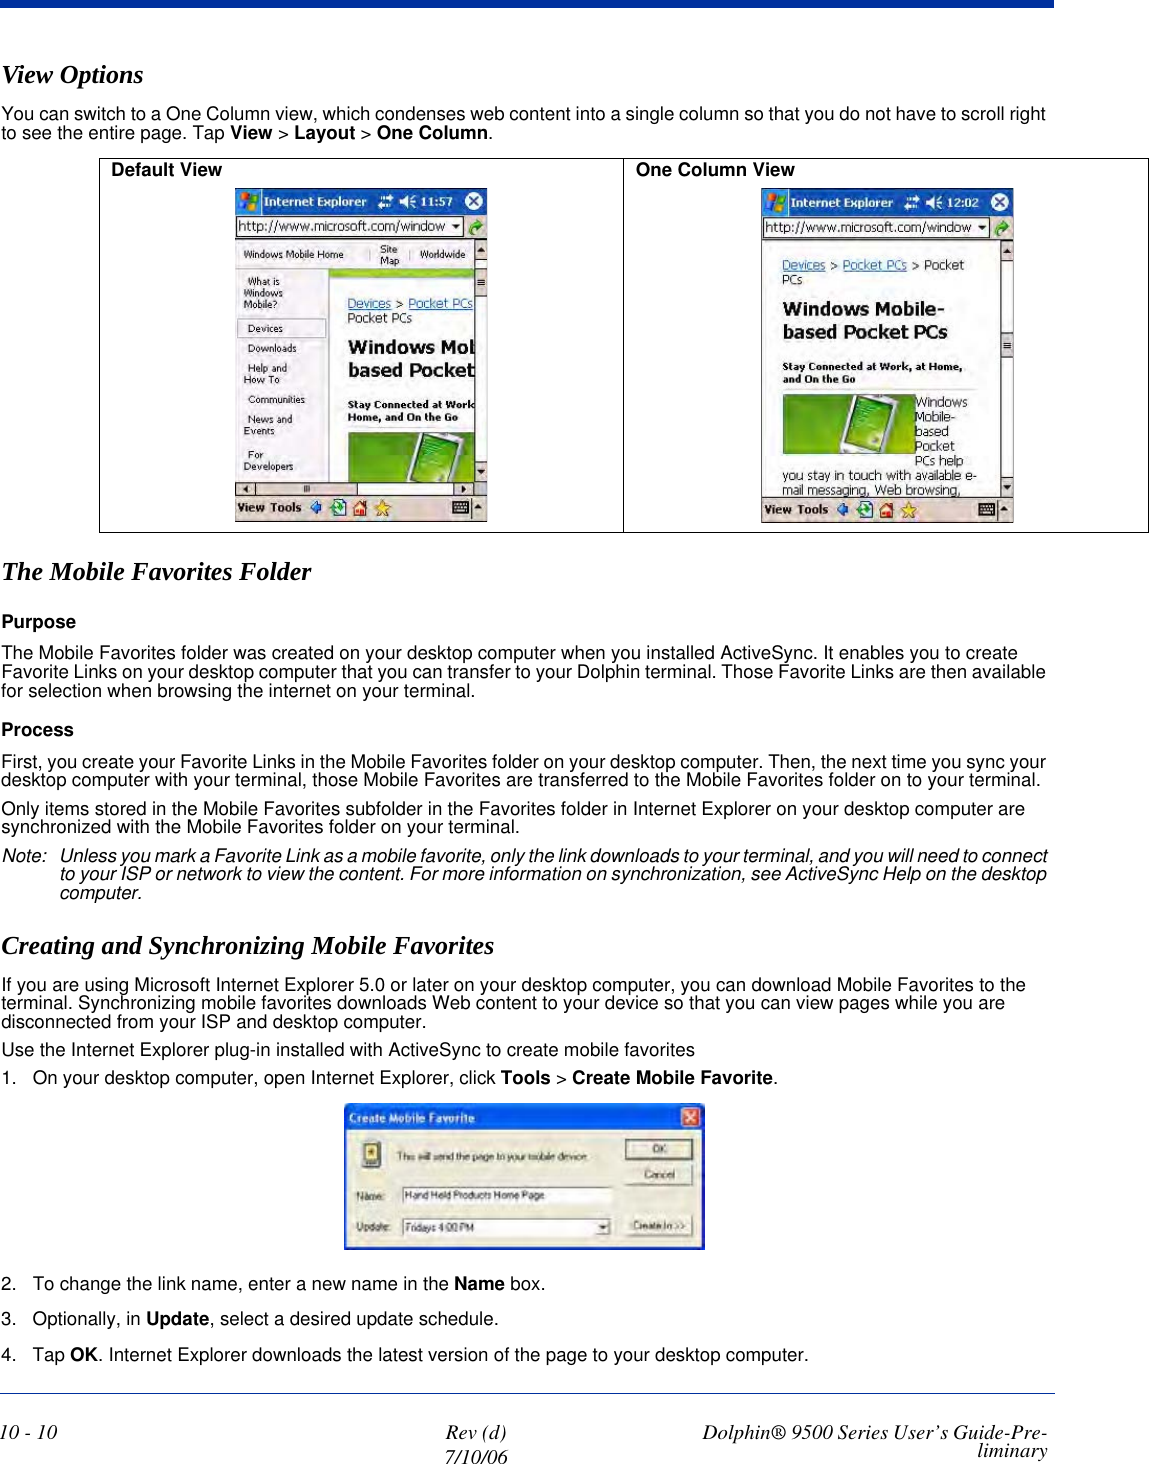 10 - 10 Rev (d)7/10/06 Dolphin® 9500 Series User’s Guide-Pre-liminaryView OptionsYou can switch to a One Column view, which condenses web content into a single column so that you do not have to scroll right to see the entire page. Tap View &gt; Layout &gt; One Column.The Mobile Favorites FolderPurposeThe Mobile Favorites folder was created on your desktop computer when you installed ActiveSync. It enables you to create Favorite Links on your desktop computer that you can transfer to your Dolphin terminal. Those Favorite Links are then available for selection when browsing the internet on your terminal. ProcessFirst, you create your Favorite Links in the Mobile Favorites folder on your desktop computer. Then, the next time you sync your desktop computer with your terminal, those Mobile Favorites are transferred to the Mobile Favorites folder on to your terminal. Only items stored in the Mobile Favorites subfolder in the Favorites folder in Internet Explorer on your desktop computer are synchronized with the Mobile Favorites folder on your terminal. Note: Unless you mark a Favorite Link as a mobile favorite, only the link downloads to your terminal, and you will need to connect to your ISP or network to view the content. For more information on synchronization, see ActiveSync Help on the desktop computer.Creating and Synchronizing Mobile Favorites If you are using Microsoft Internet Explorer 5.0 or later on your desktop computer, you can download Mobile Favorites to the terminal. Synchronizing mobile favorites downloads Web content to your device so that you can view pages while you are disconnected from your ISP and desktop computer.Use the Internet Explorer plug-in installed with ActiveSync to create mobile favorites1. On your desktop computer, open Internet Explorer, click Tools &gt; Create Mobile Favorite.2. To change the link name, enter a new name in the Name box. 3. Optionally, in Update, select a desired update schedule.4. Tap OK. Internet Explorer downloads the latest version of the page to your desktop computer.Default View  One Column View 